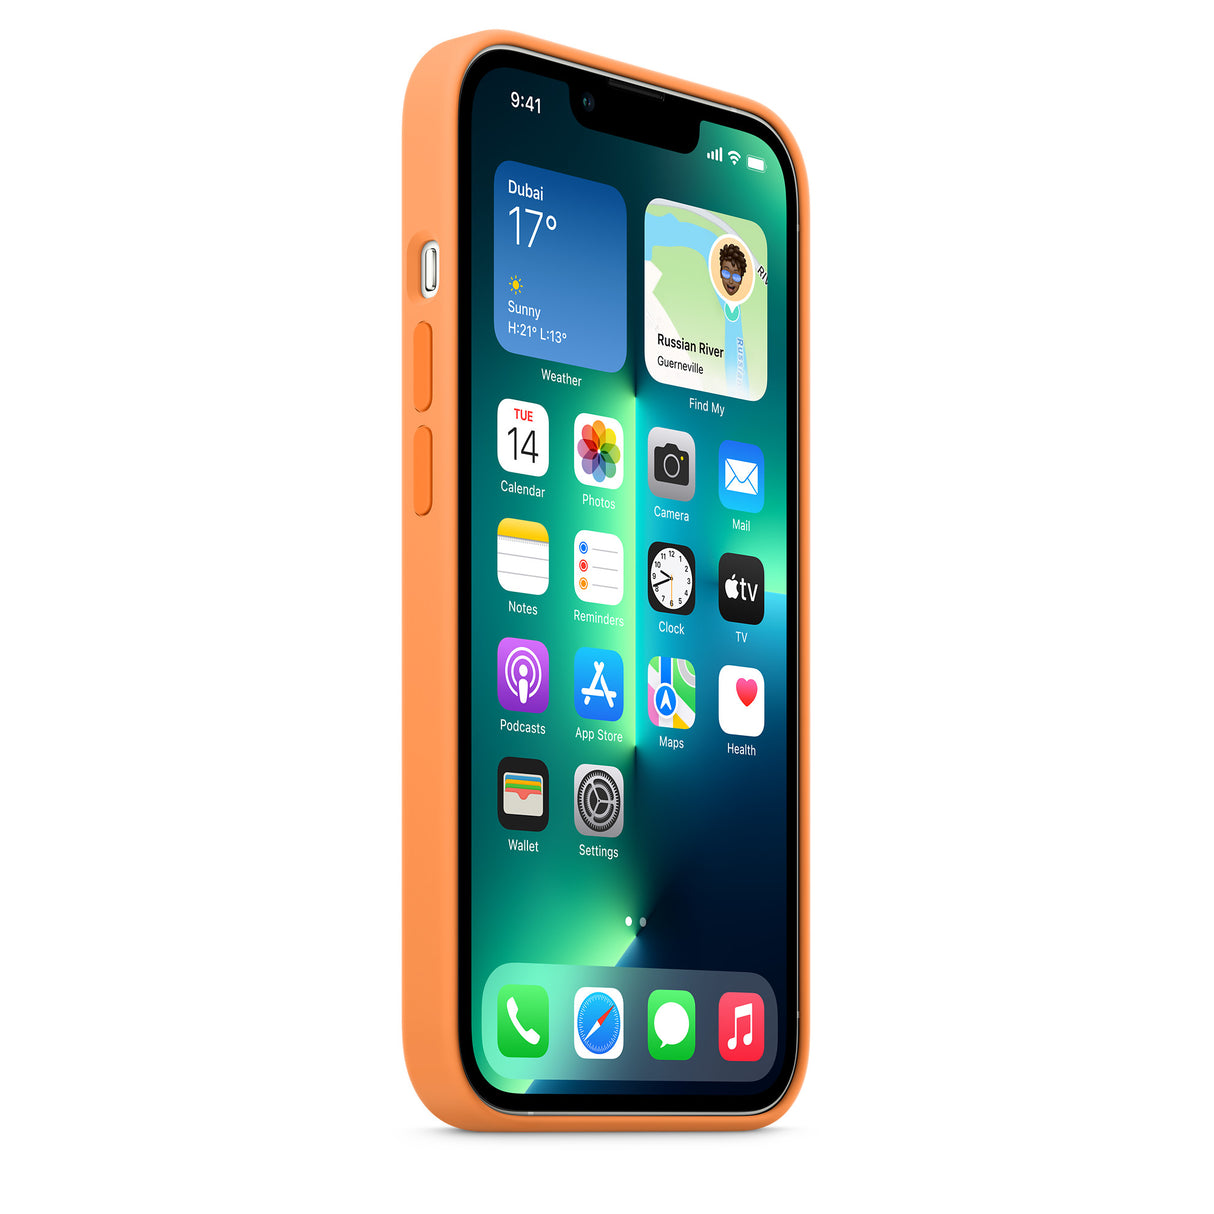 iPhone 13 Pro Silicone Case with MagSafe - Marigold  OB